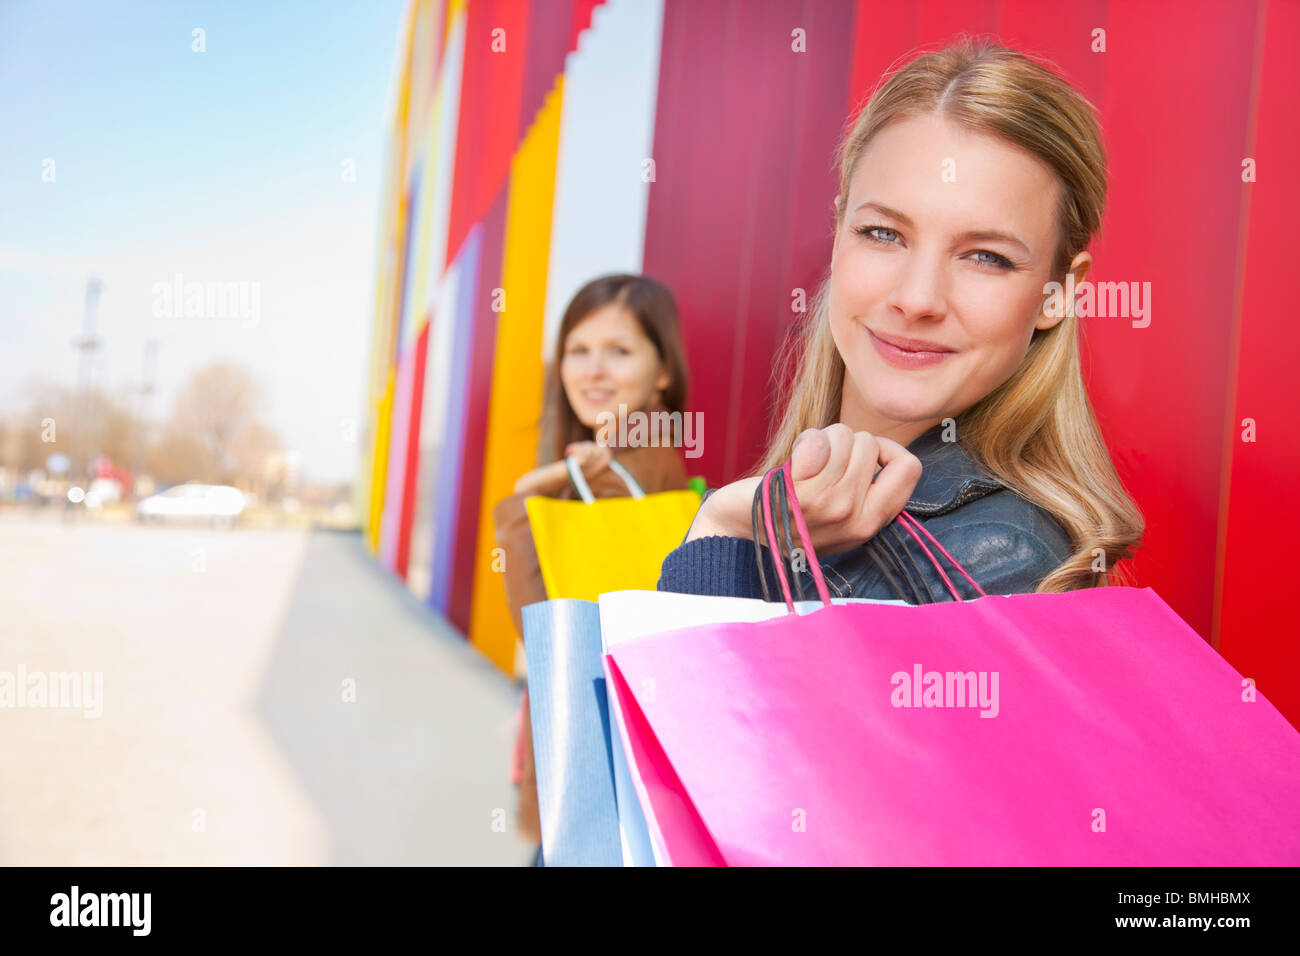 Girls with shopping bags near mall Stock Photo